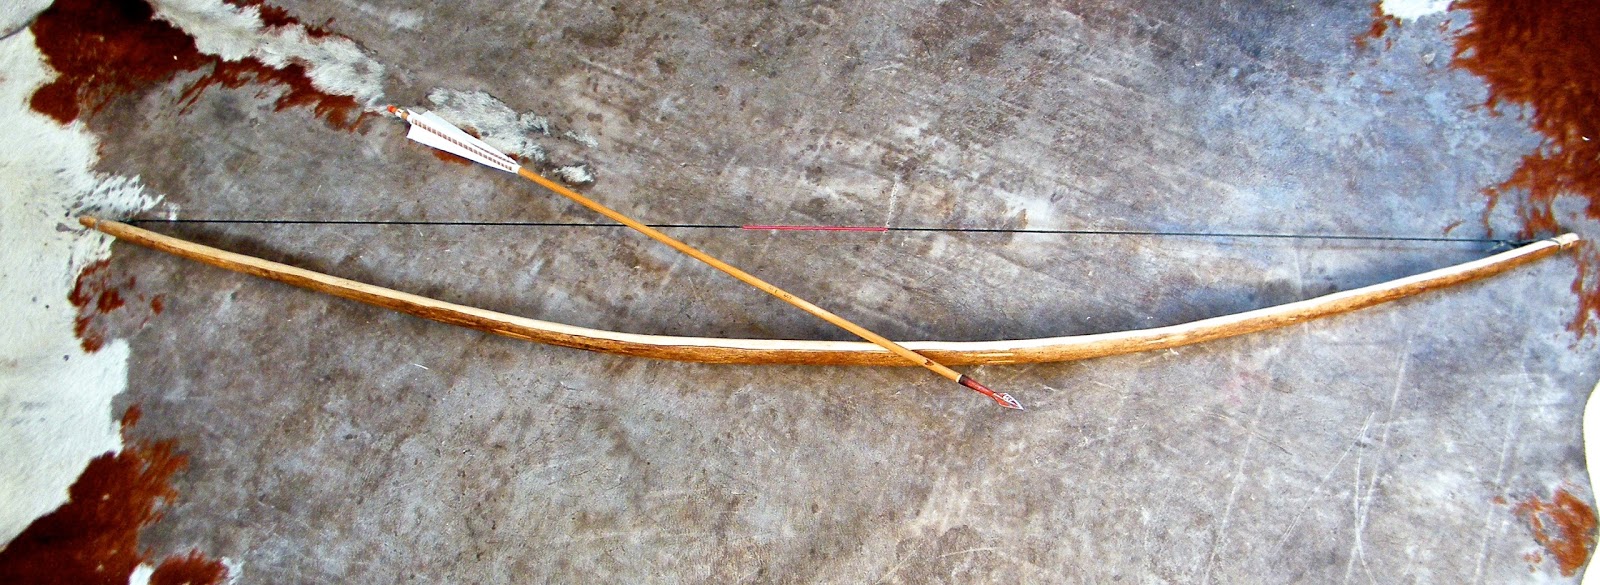 SELF MADE ASH HUNTING BOW #50 @ 30" WITH THE TREE BARK LEFT ON.